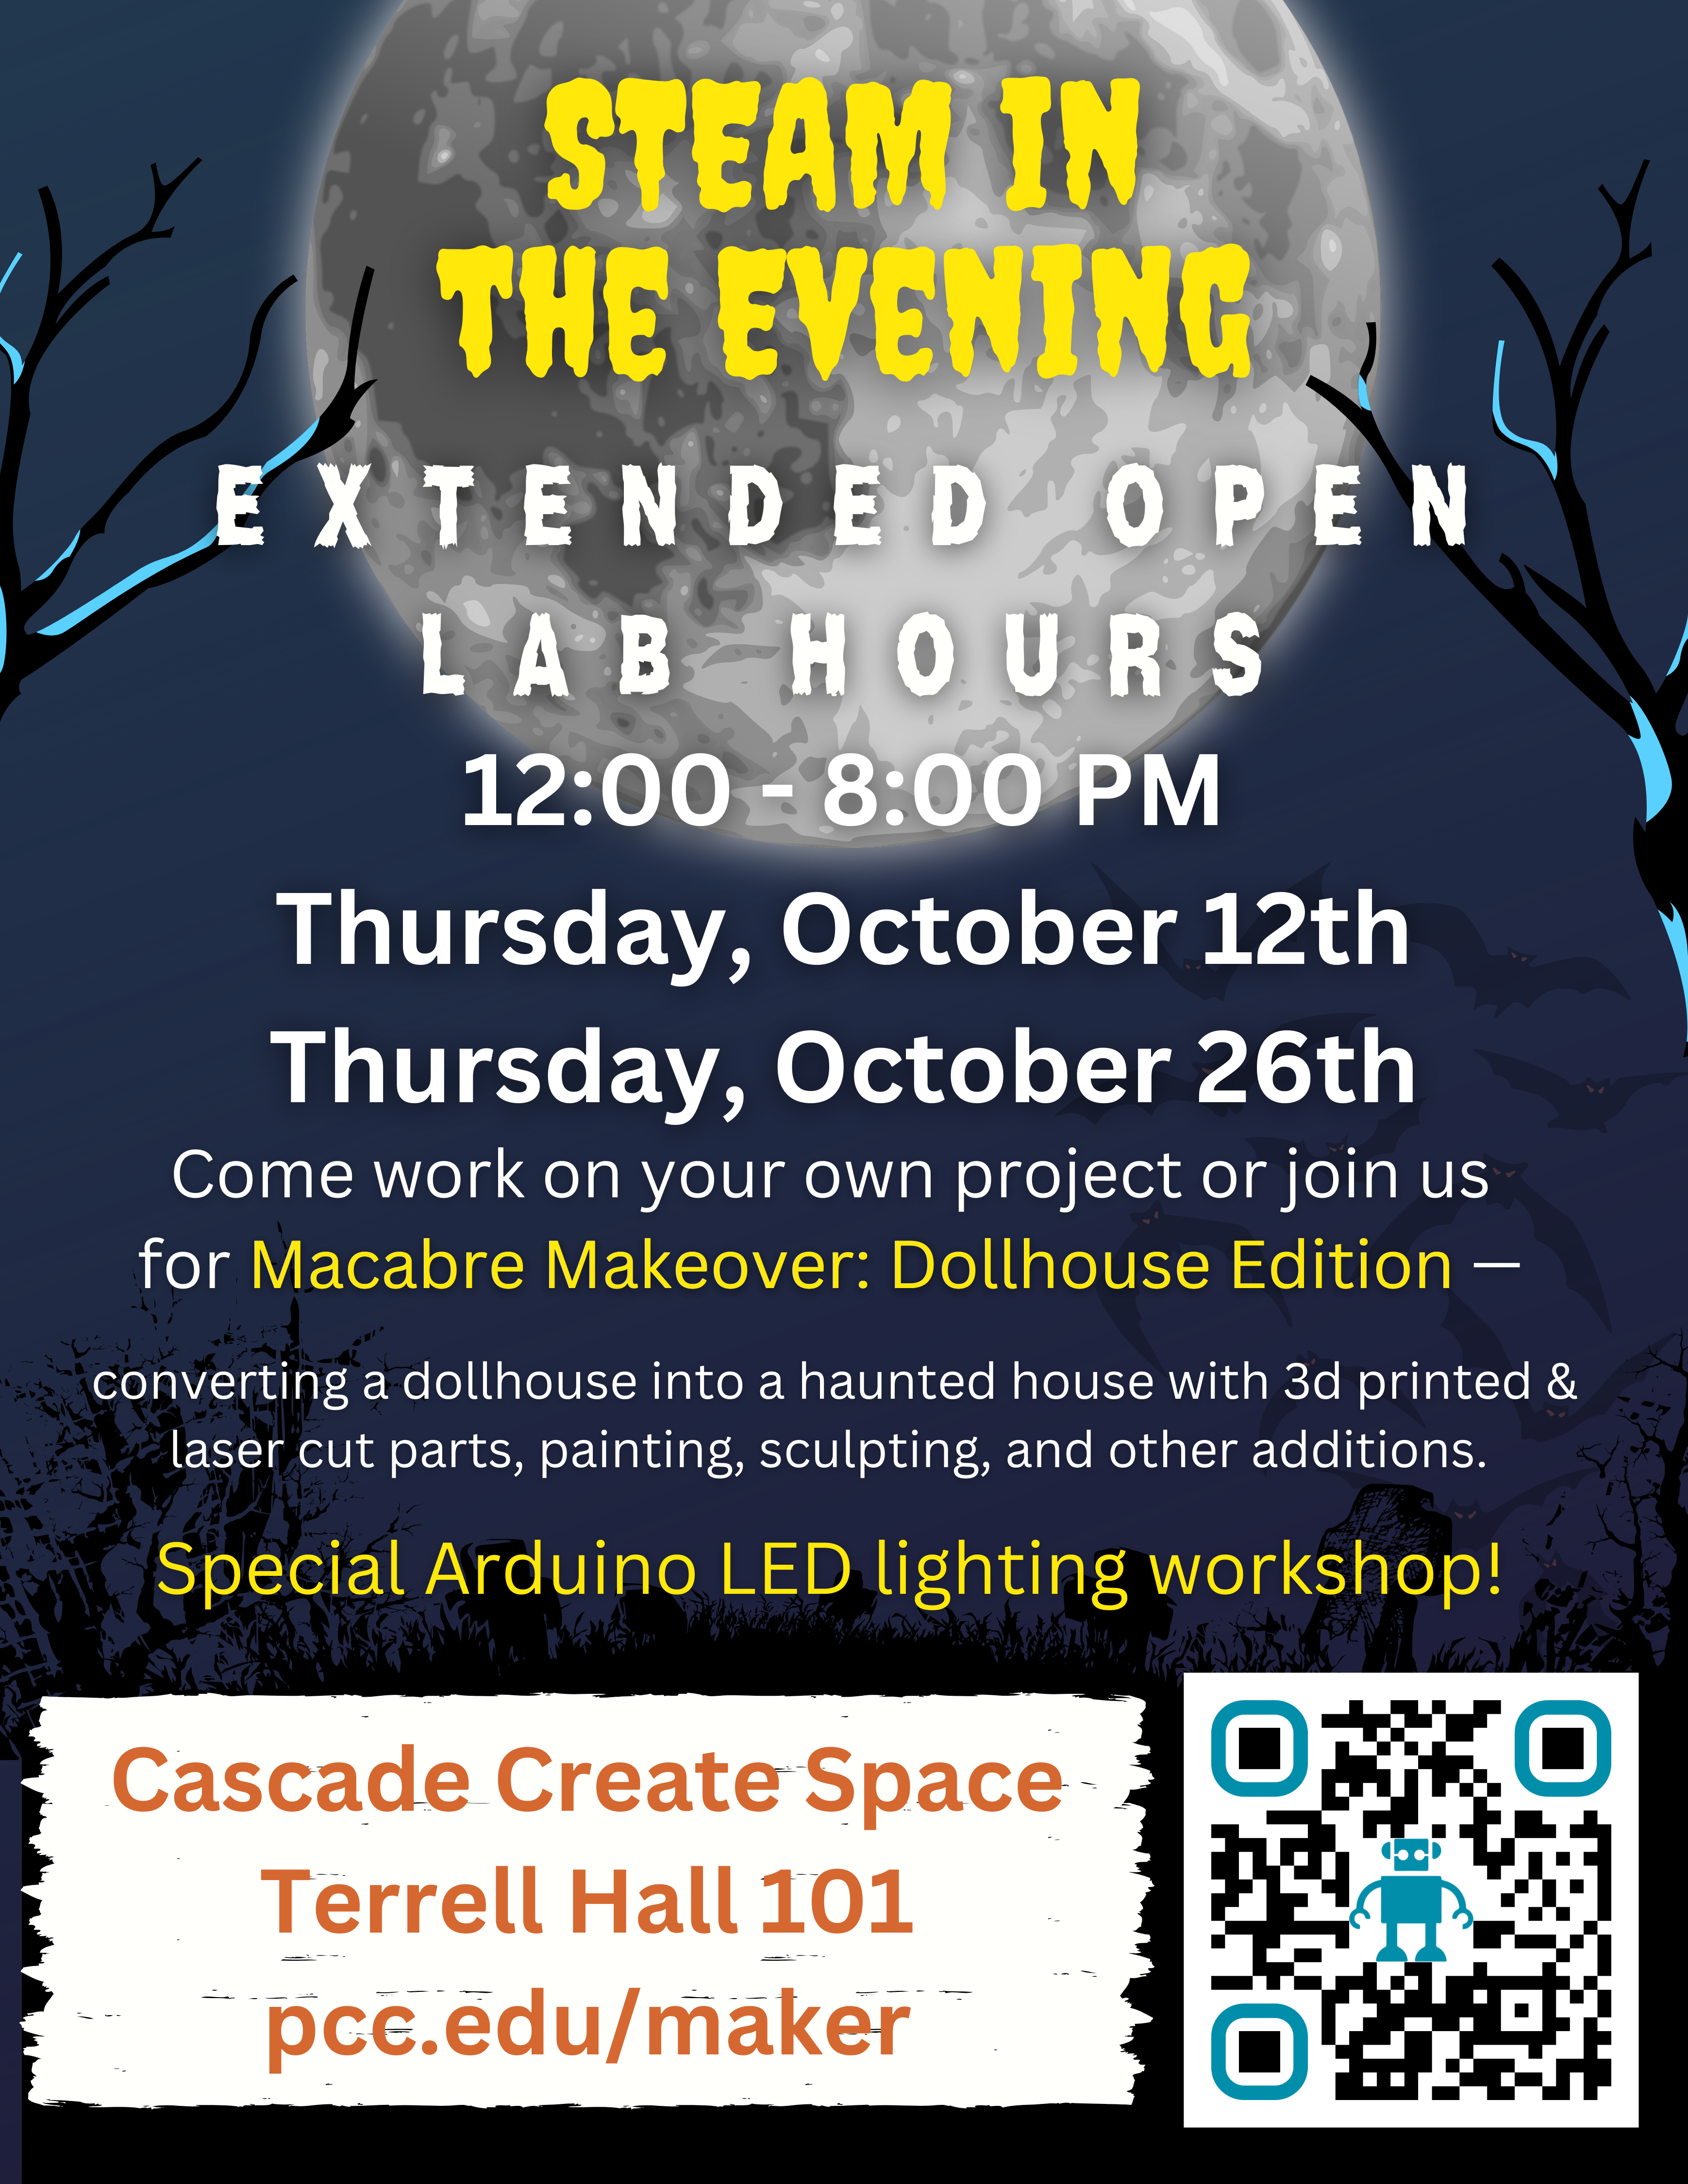 STEAM in the Evening
Extended Open Lab Hours
12:00 - 8:00 PM
Thursday, October 12th
Thursday, October 26th
Come work on your own project or join us for Macabre Makeover: Dollhouse Edition — converting a dollhouse into a haunted house with 3d printed & laser cut parts, painting, sculpting, and other additions.
Special Arduino LED lighting workshop!
